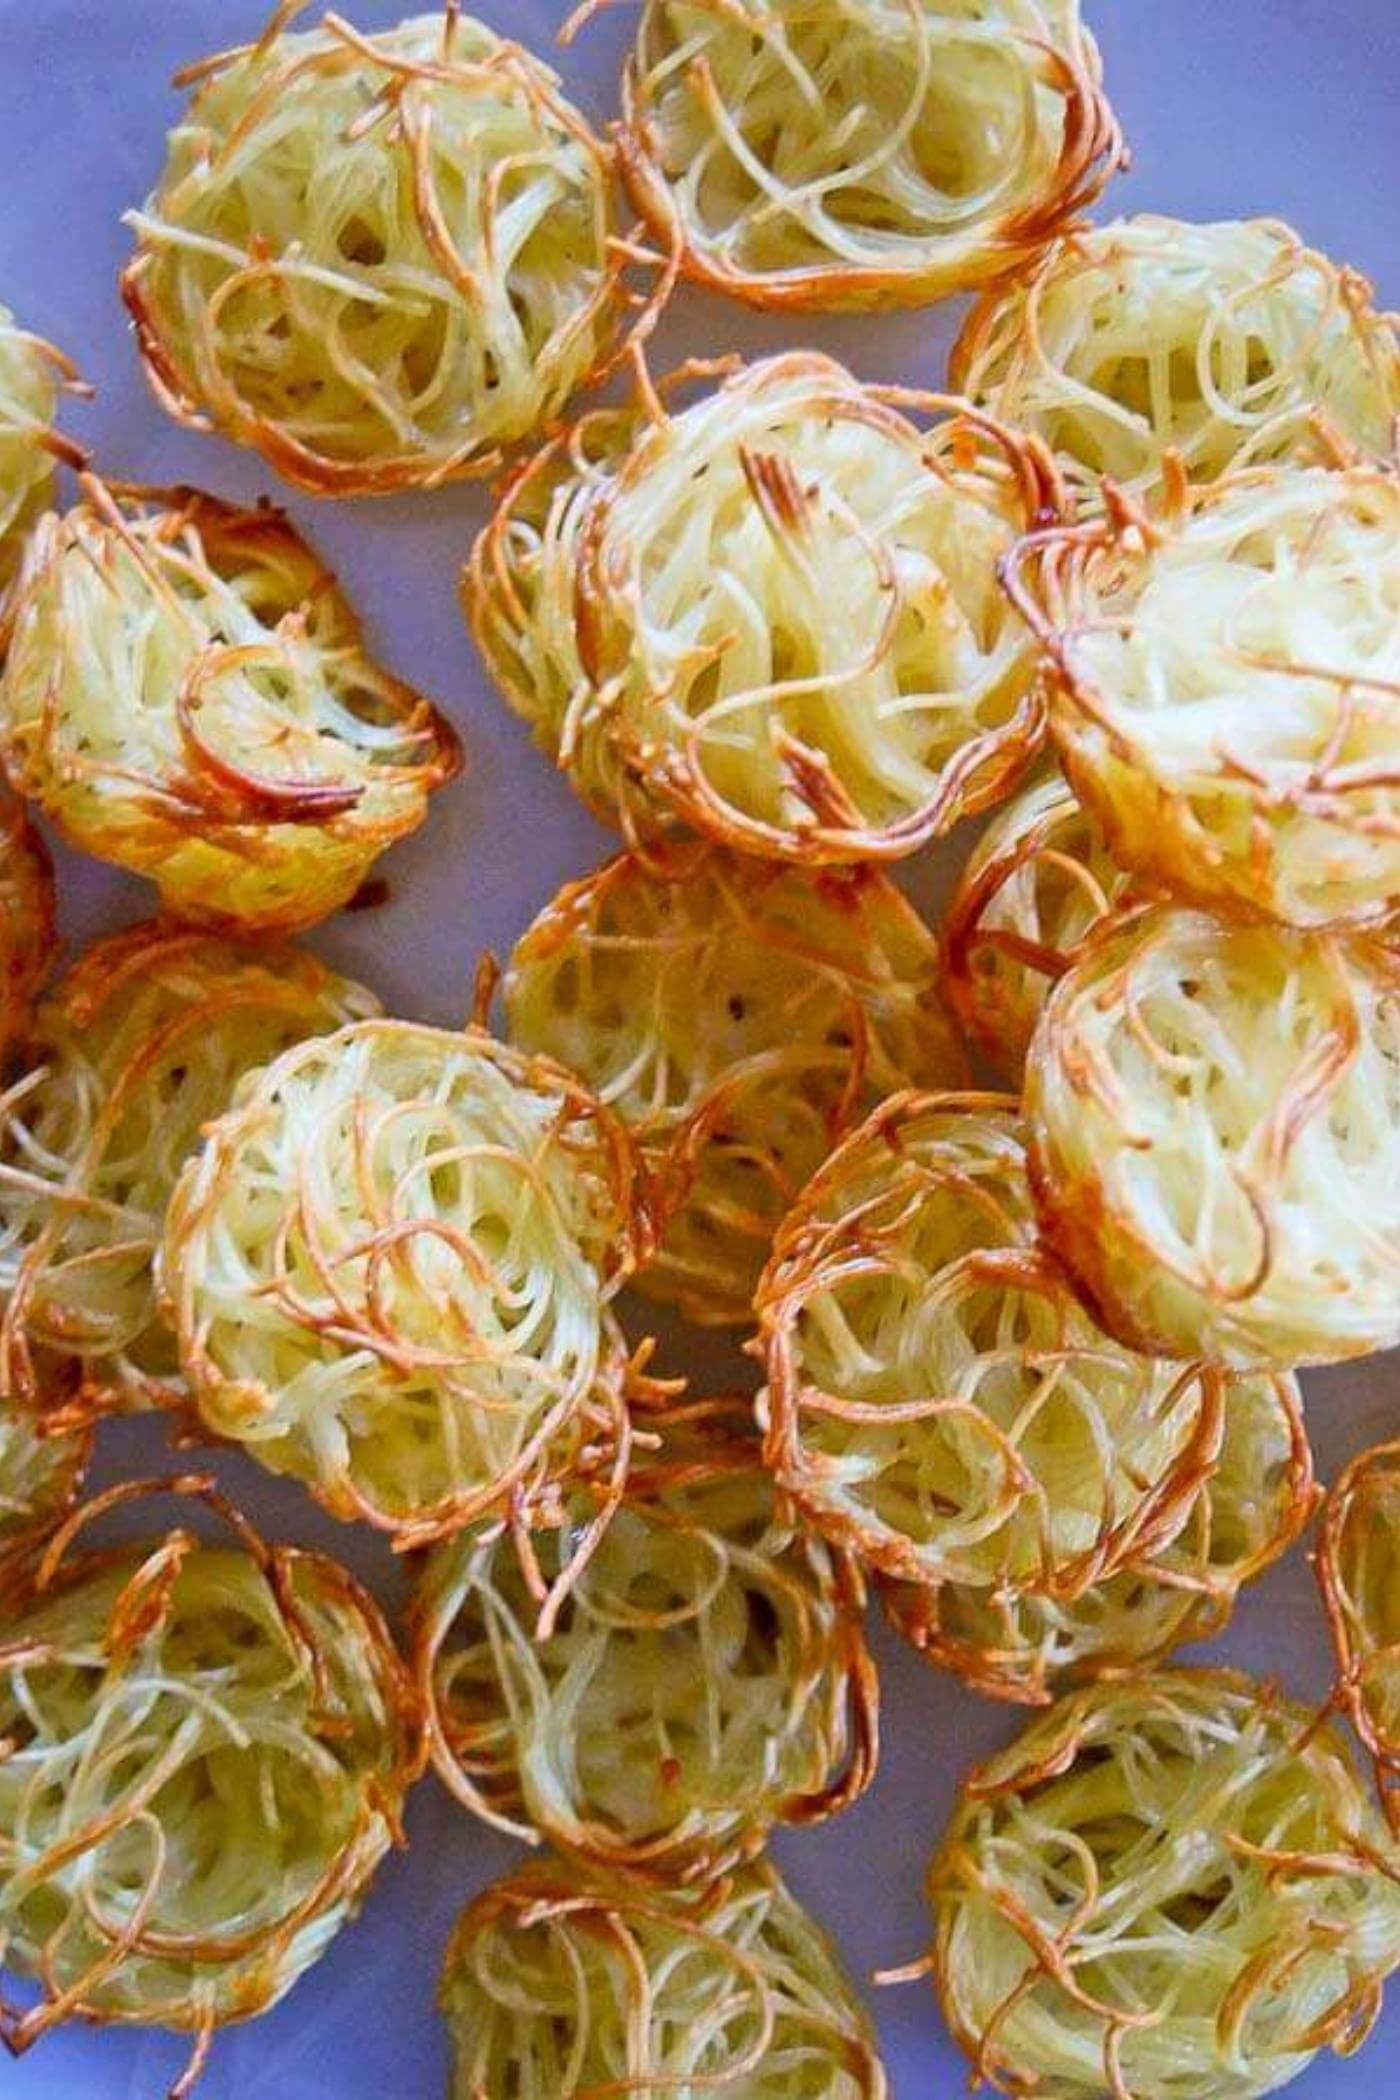 baked pasta nests in a pile.